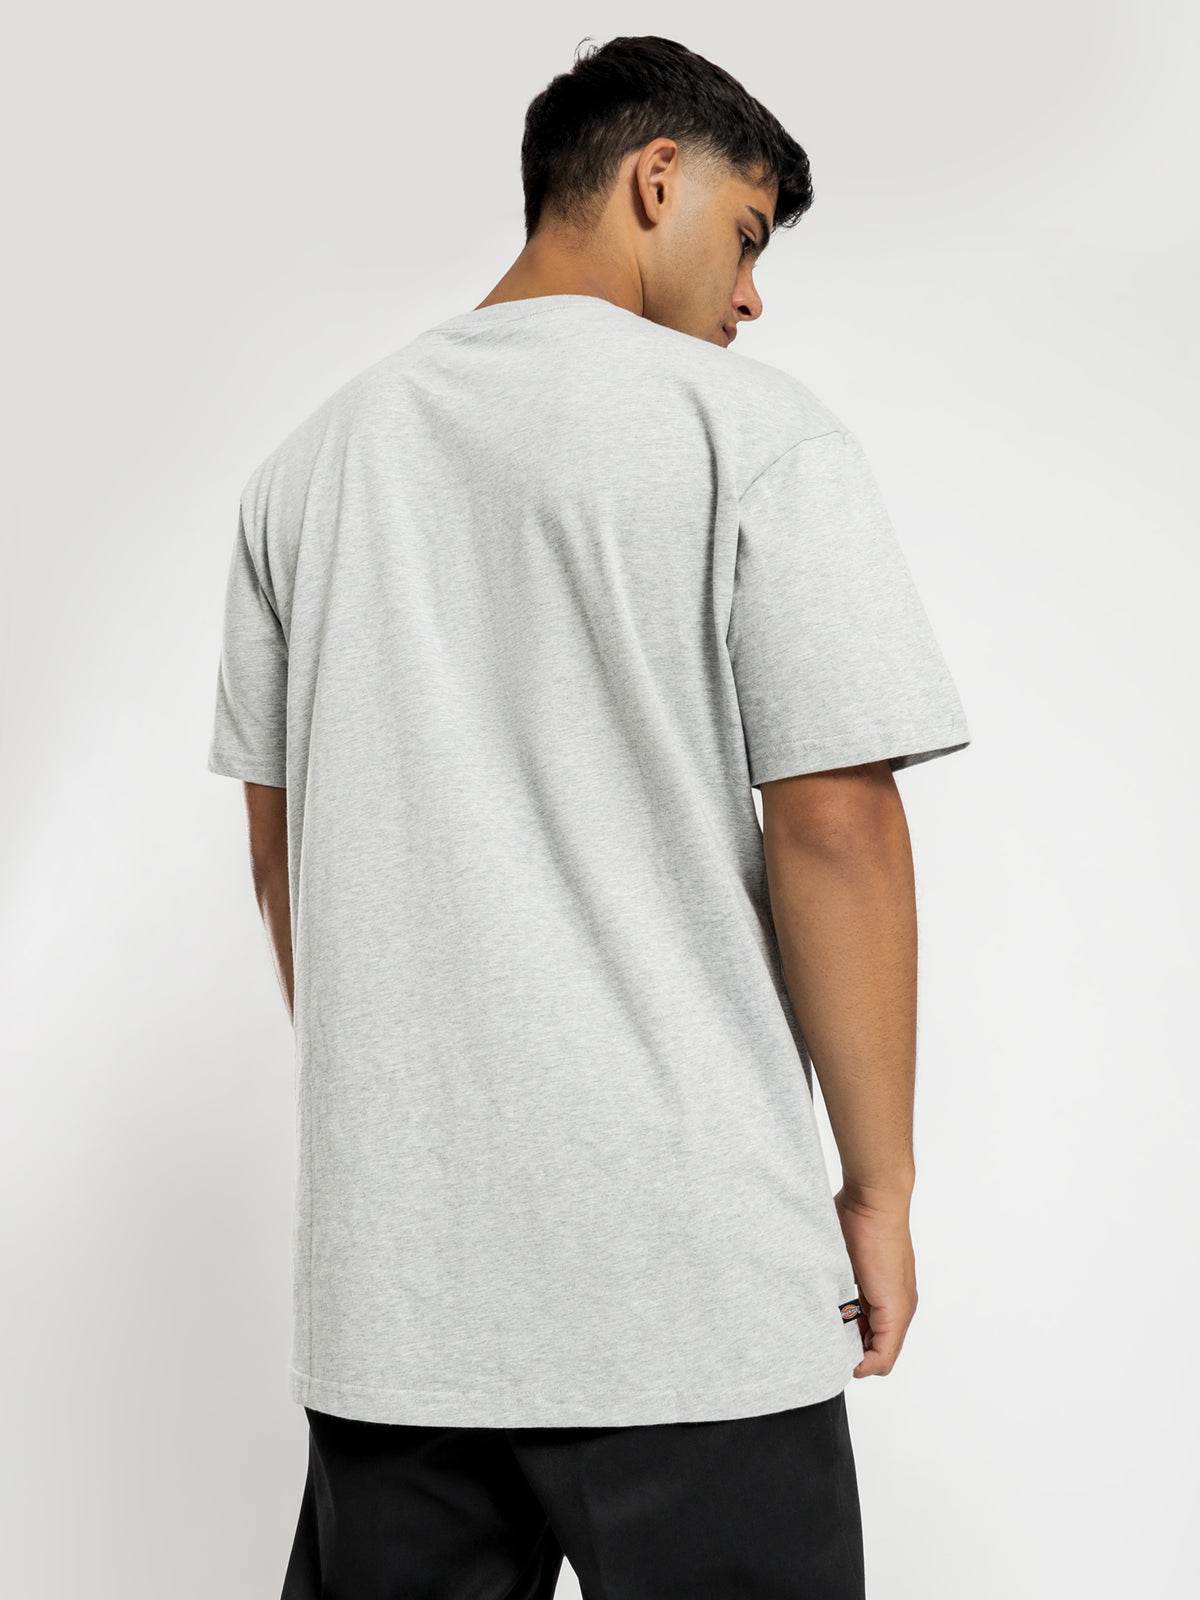 H.S Rockwood Classic Fit Short Sleeve T-Shirt in Grey Marle